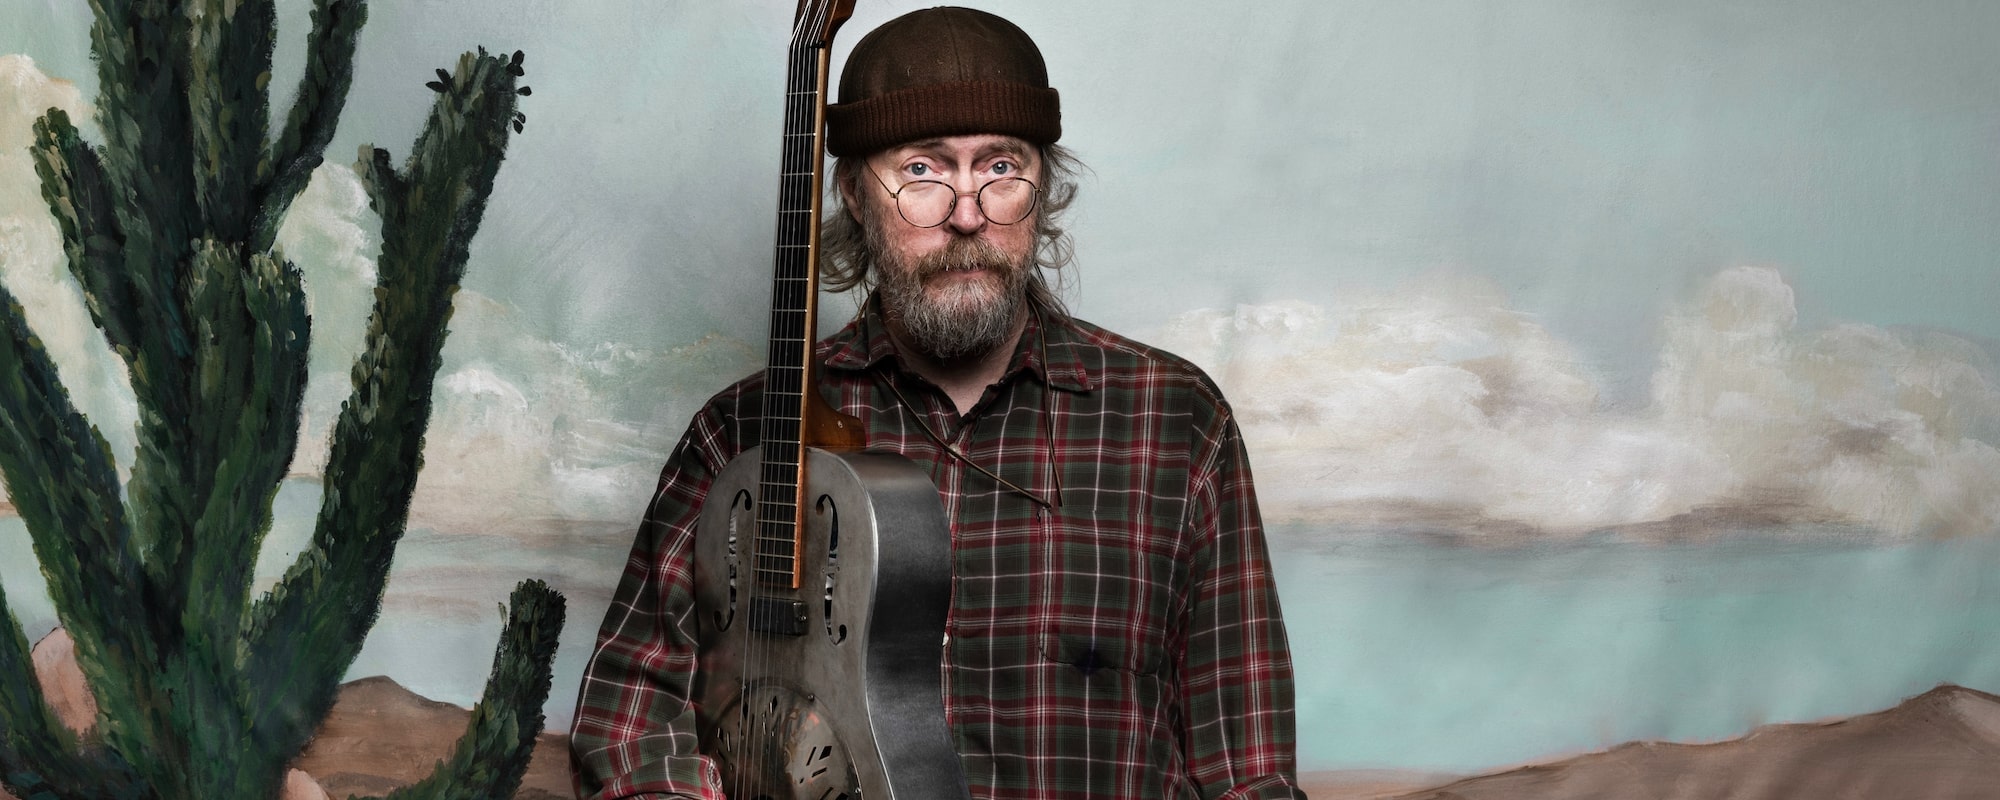 Charlie Parr Discusses the New Path He Took on His Upcoming Album ‘Little Sun’